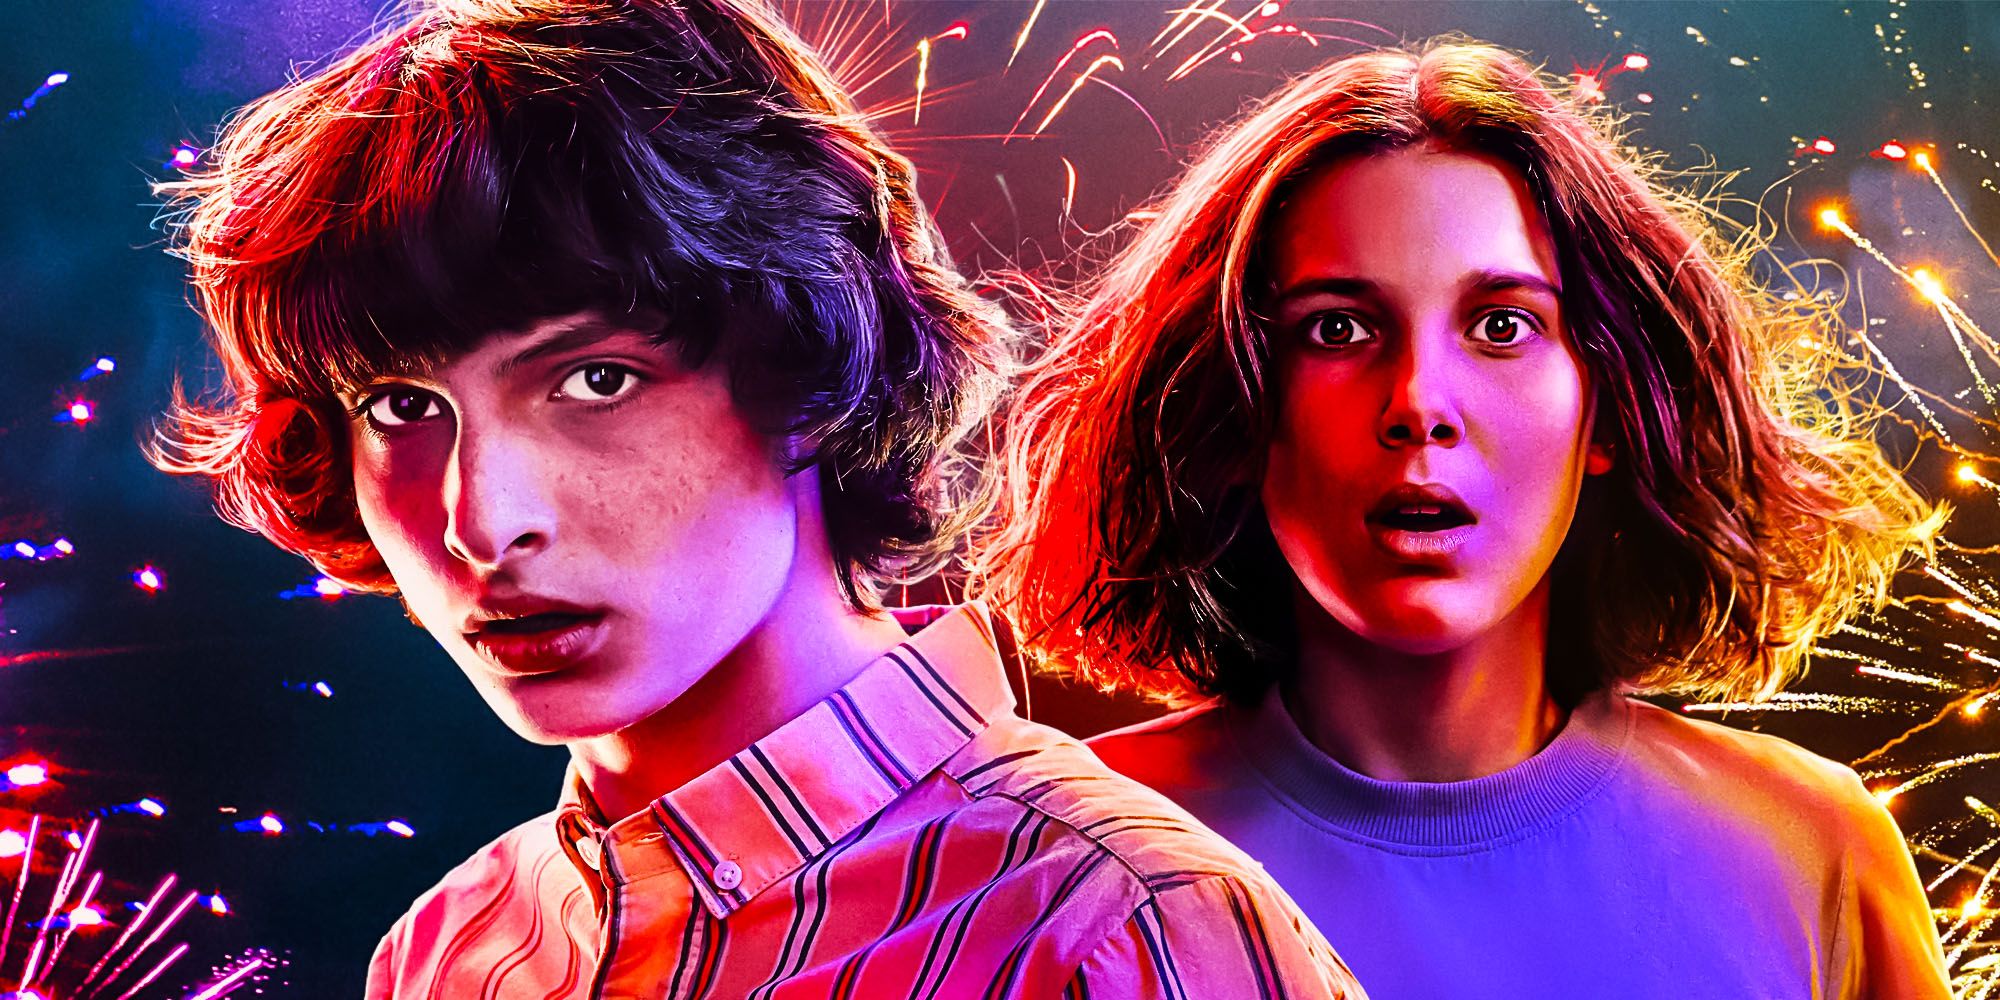 Stranger things season 4 wasted its biggest twist mike and Eleven break up